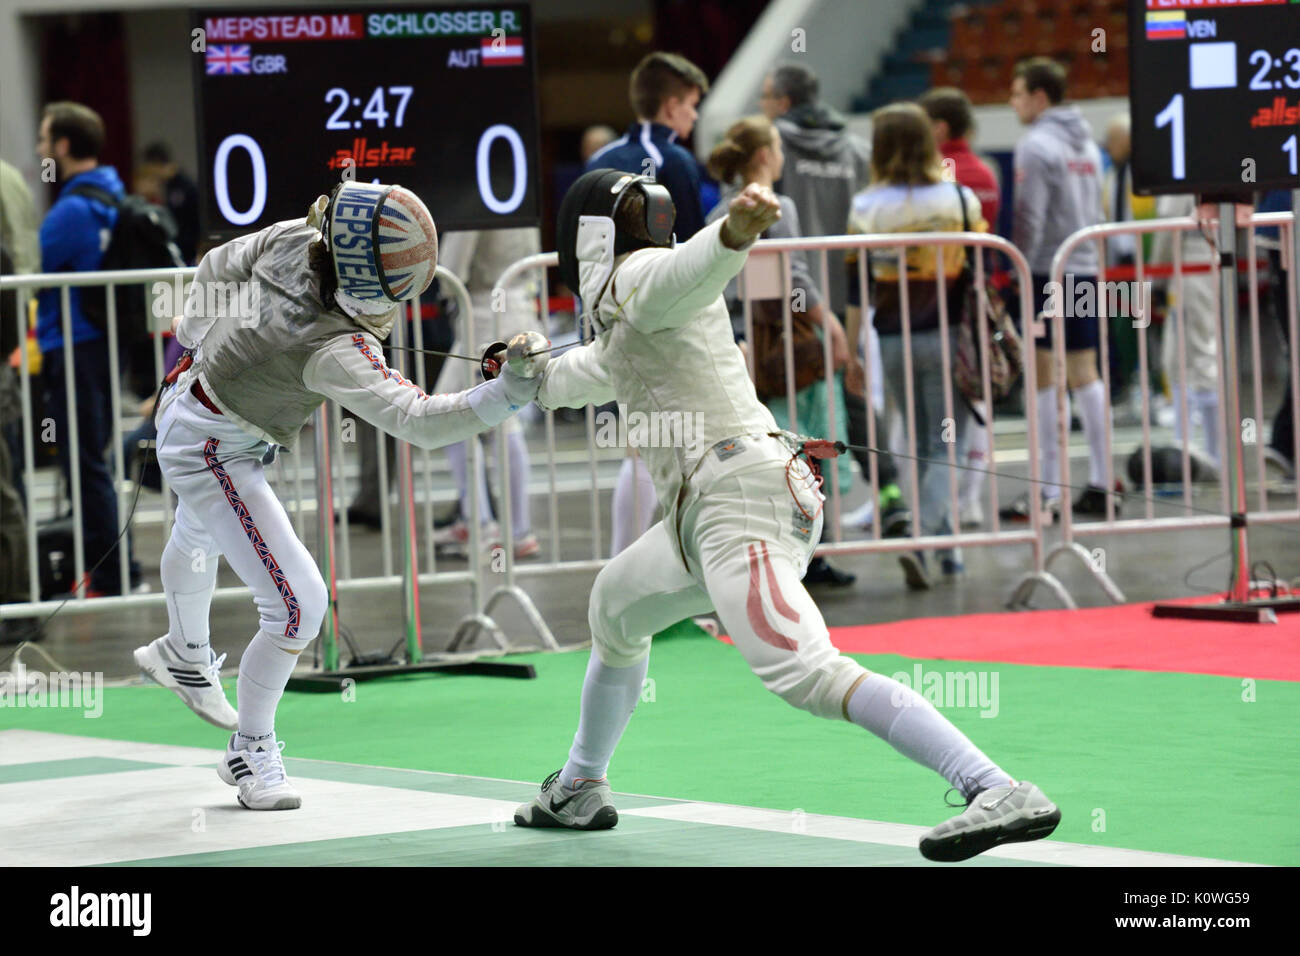 St. Petersburg, Russia - May 1, 2015: Marcus Mepstead of Great Britain vs Roland Schlosser of Austria during the first day of competitions in 41th Int Stock Photo